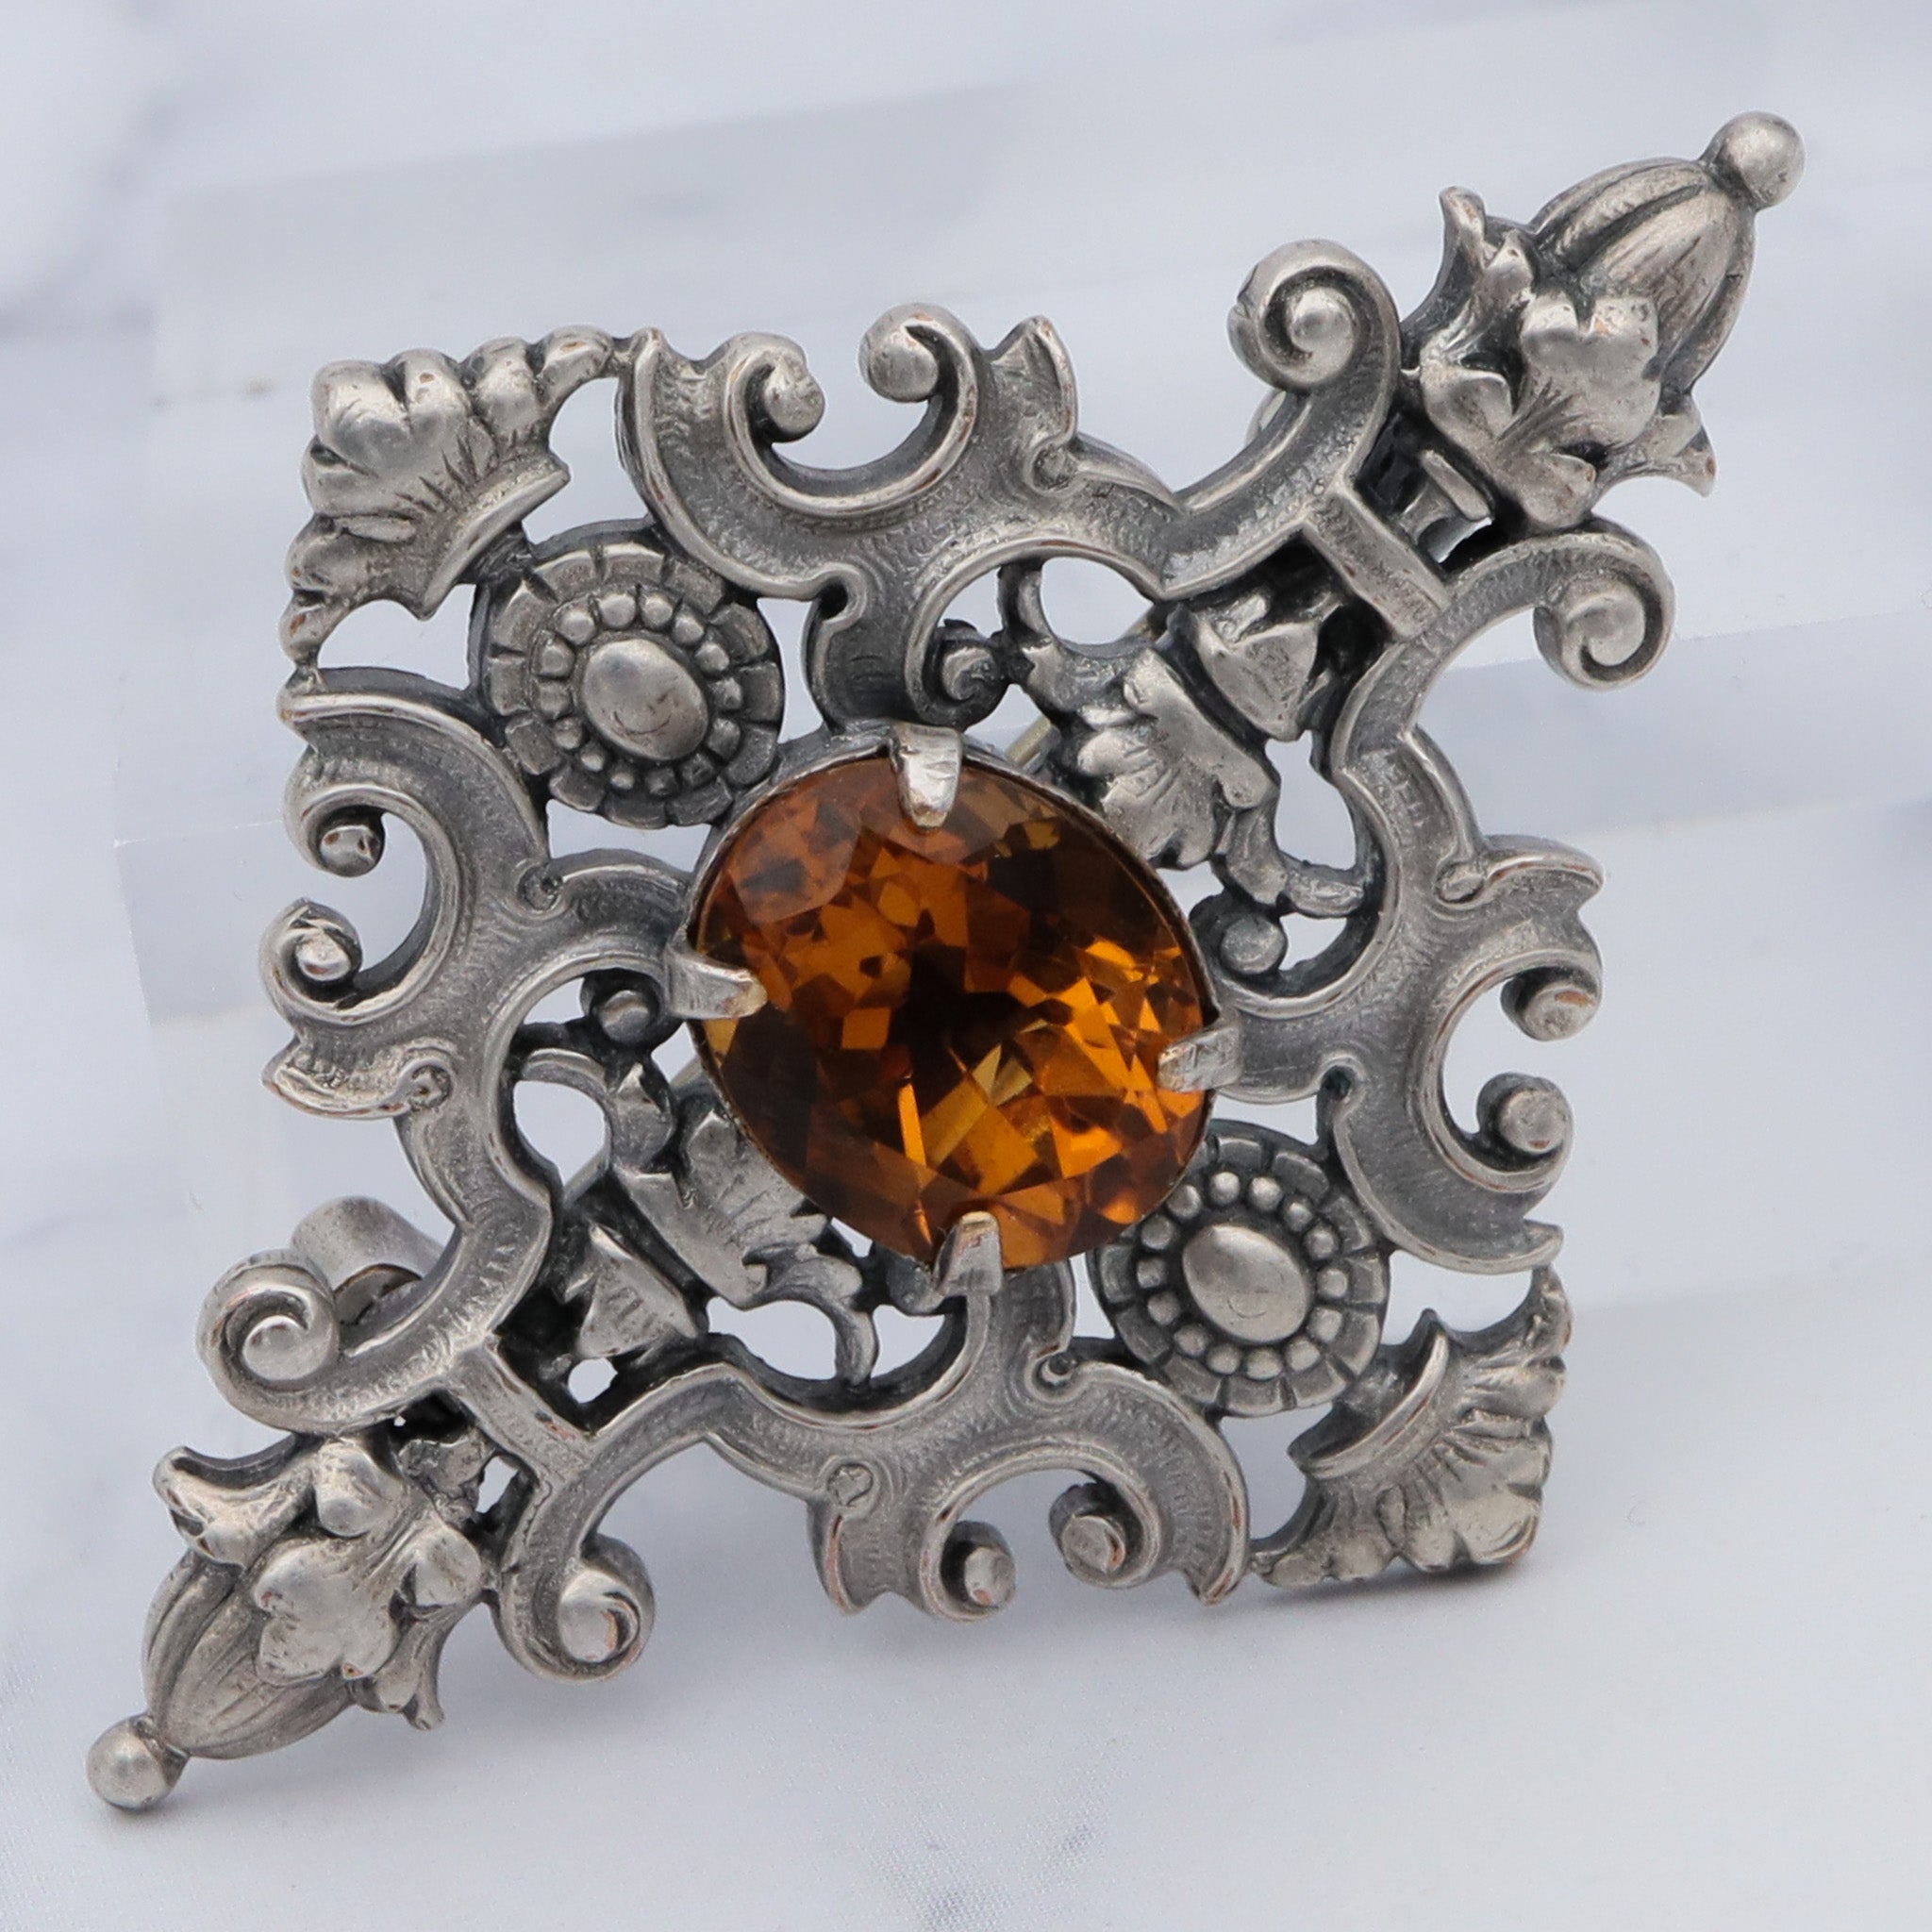 Vintage Renaissance revival style silver plated citrine brooch